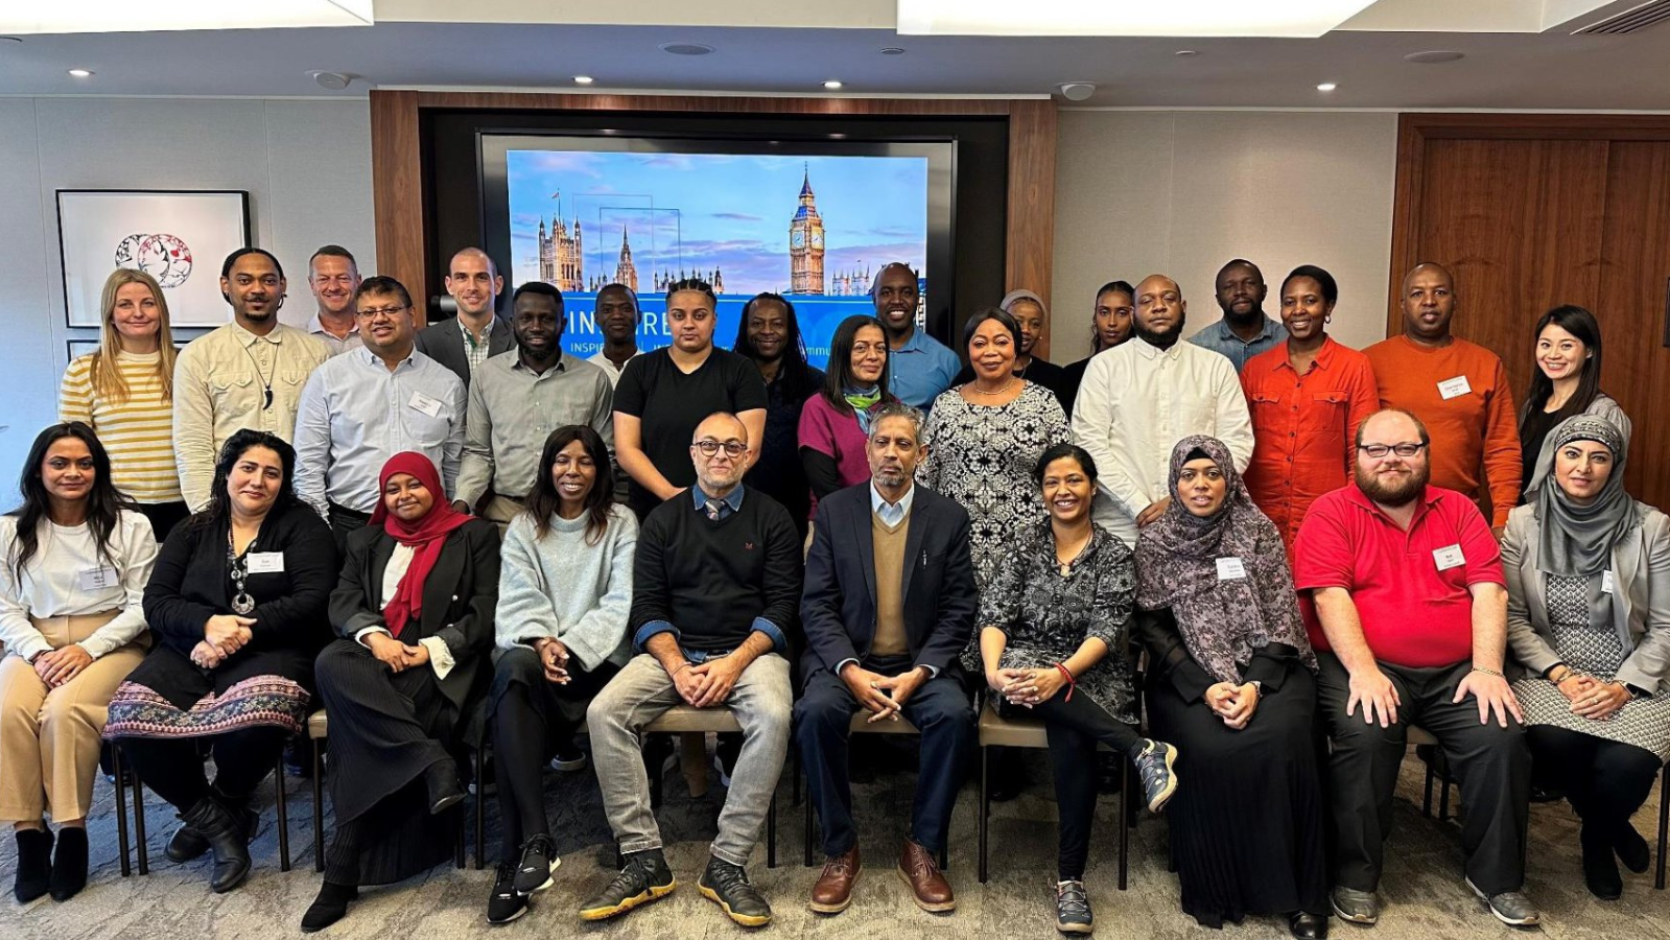 Representatives of the grassroots community groups funded by Pathways to Economic Opportunities programme, sitting and standing together for a photo. These representatives were taking part in the JPMorgan Inspire leadership and organisational development programme.